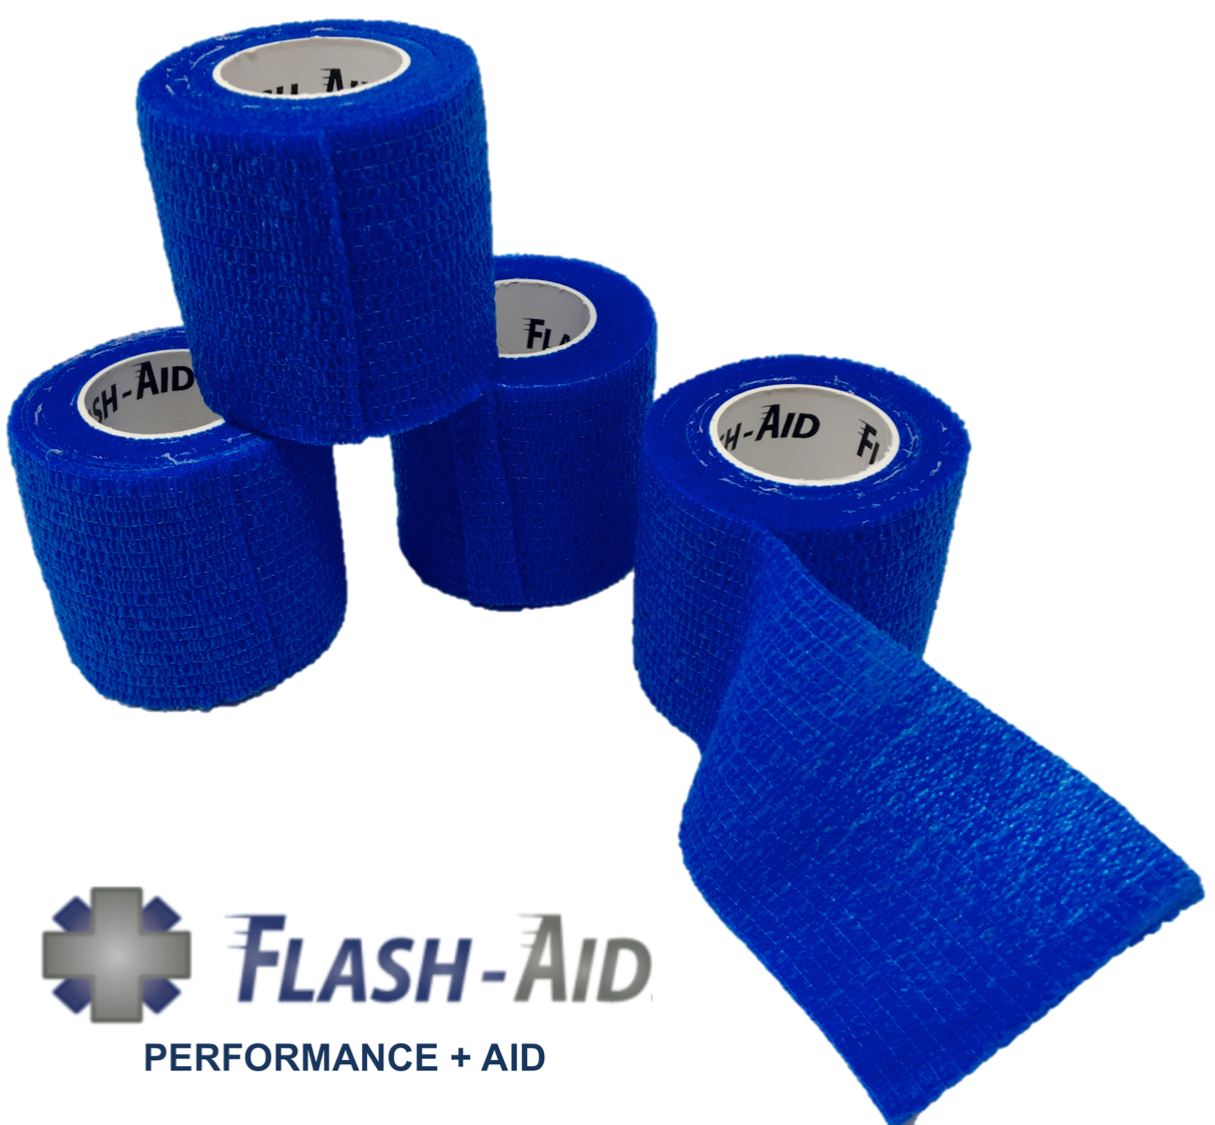 Self-Stick Cohesive Wrap - 4-Pack - AllaQuix™ - Stop Bleeding Quick Like the Pros!